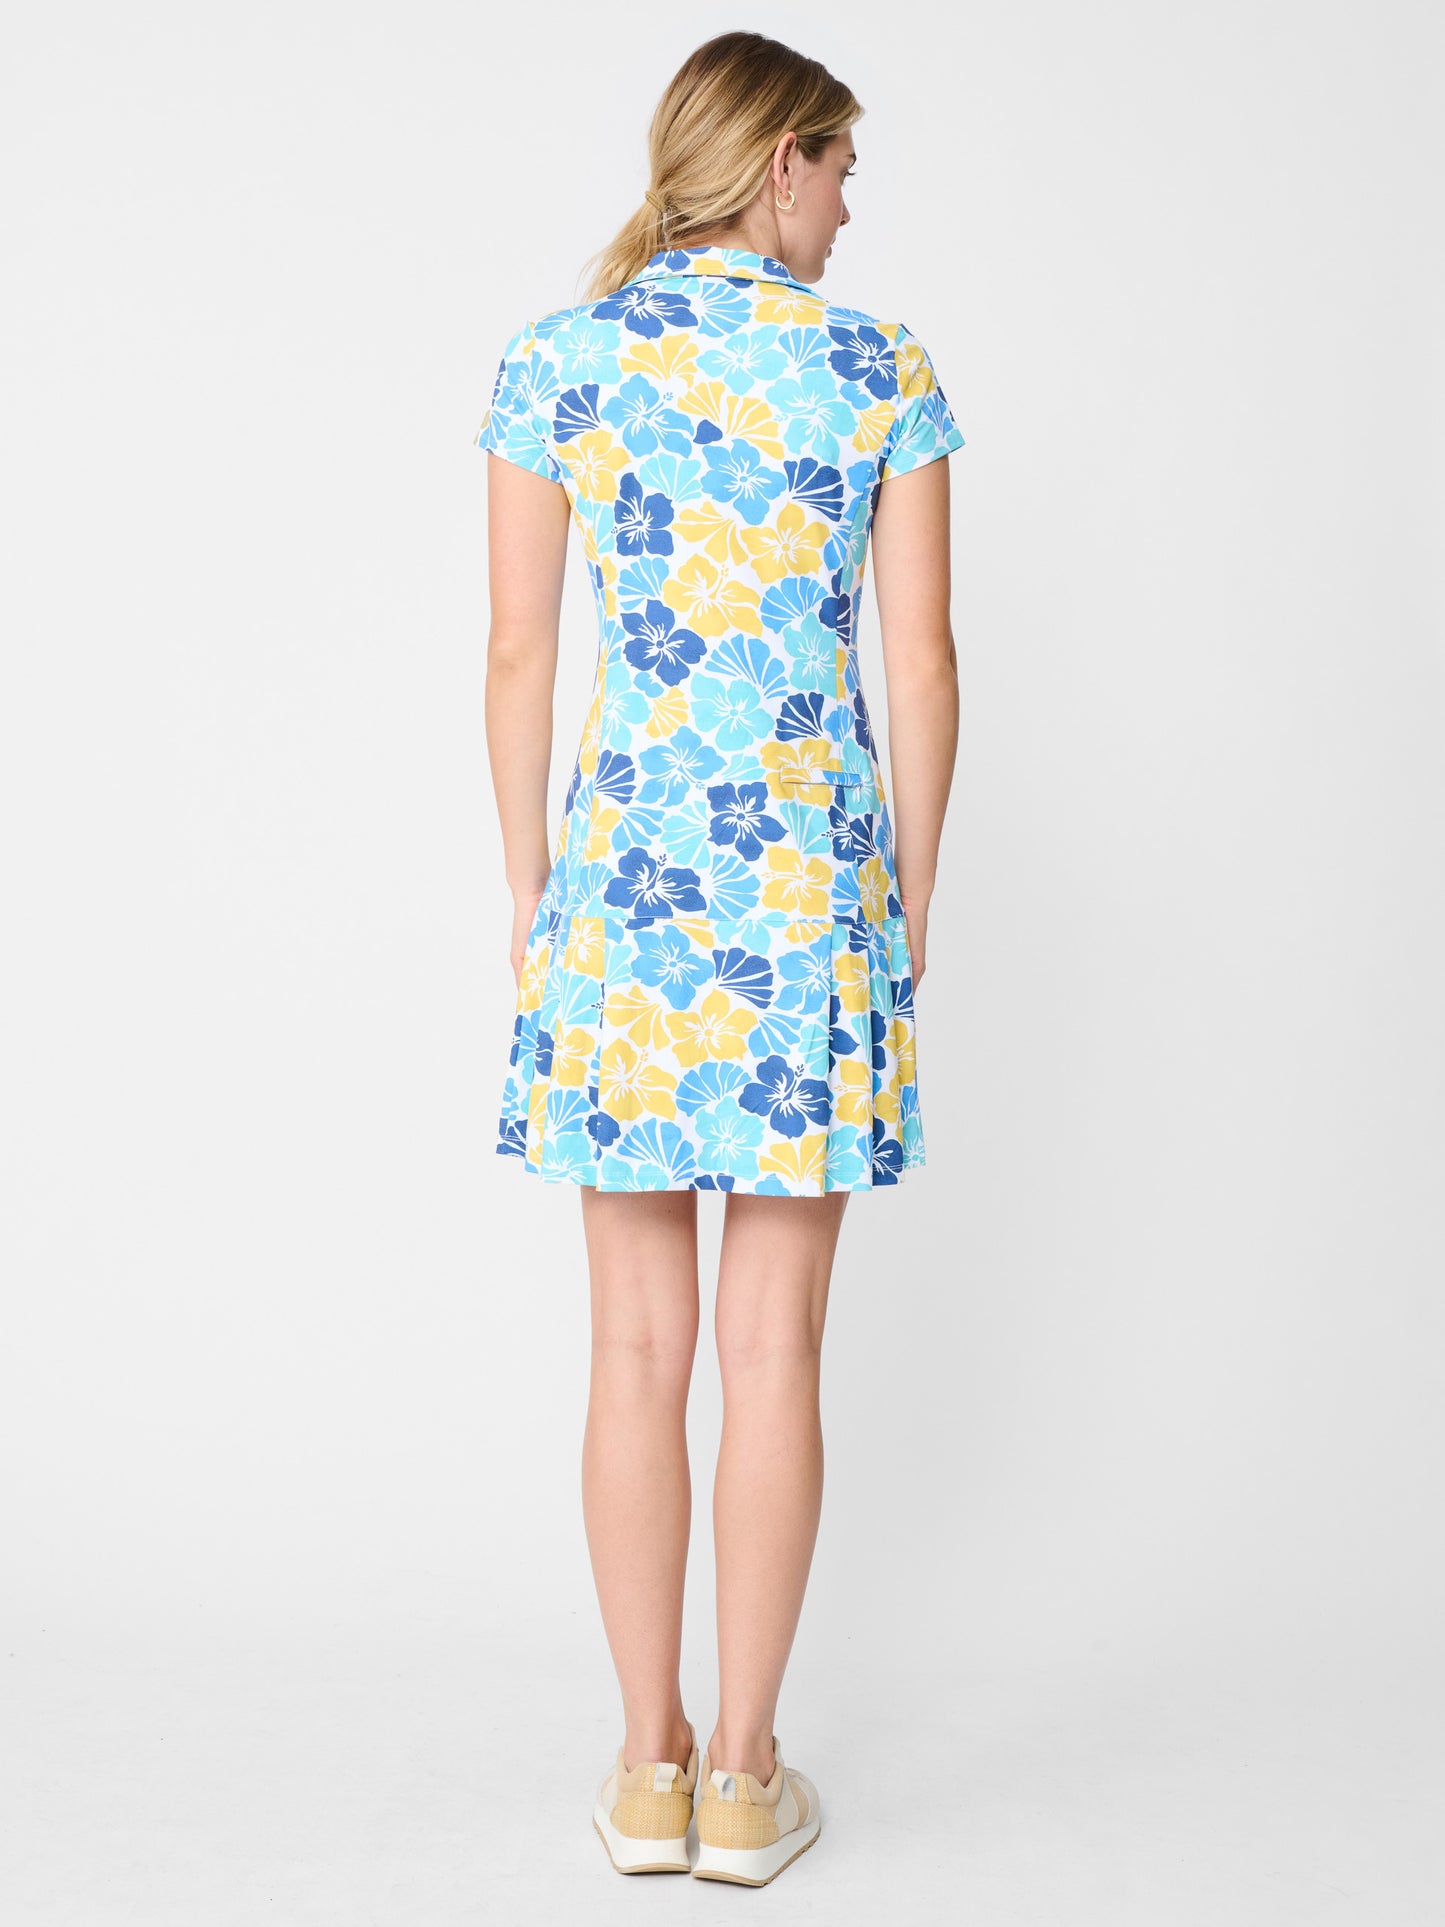 J.McLaughlin Dorte dress in blue/navy/yellow made with Catalina cloth.